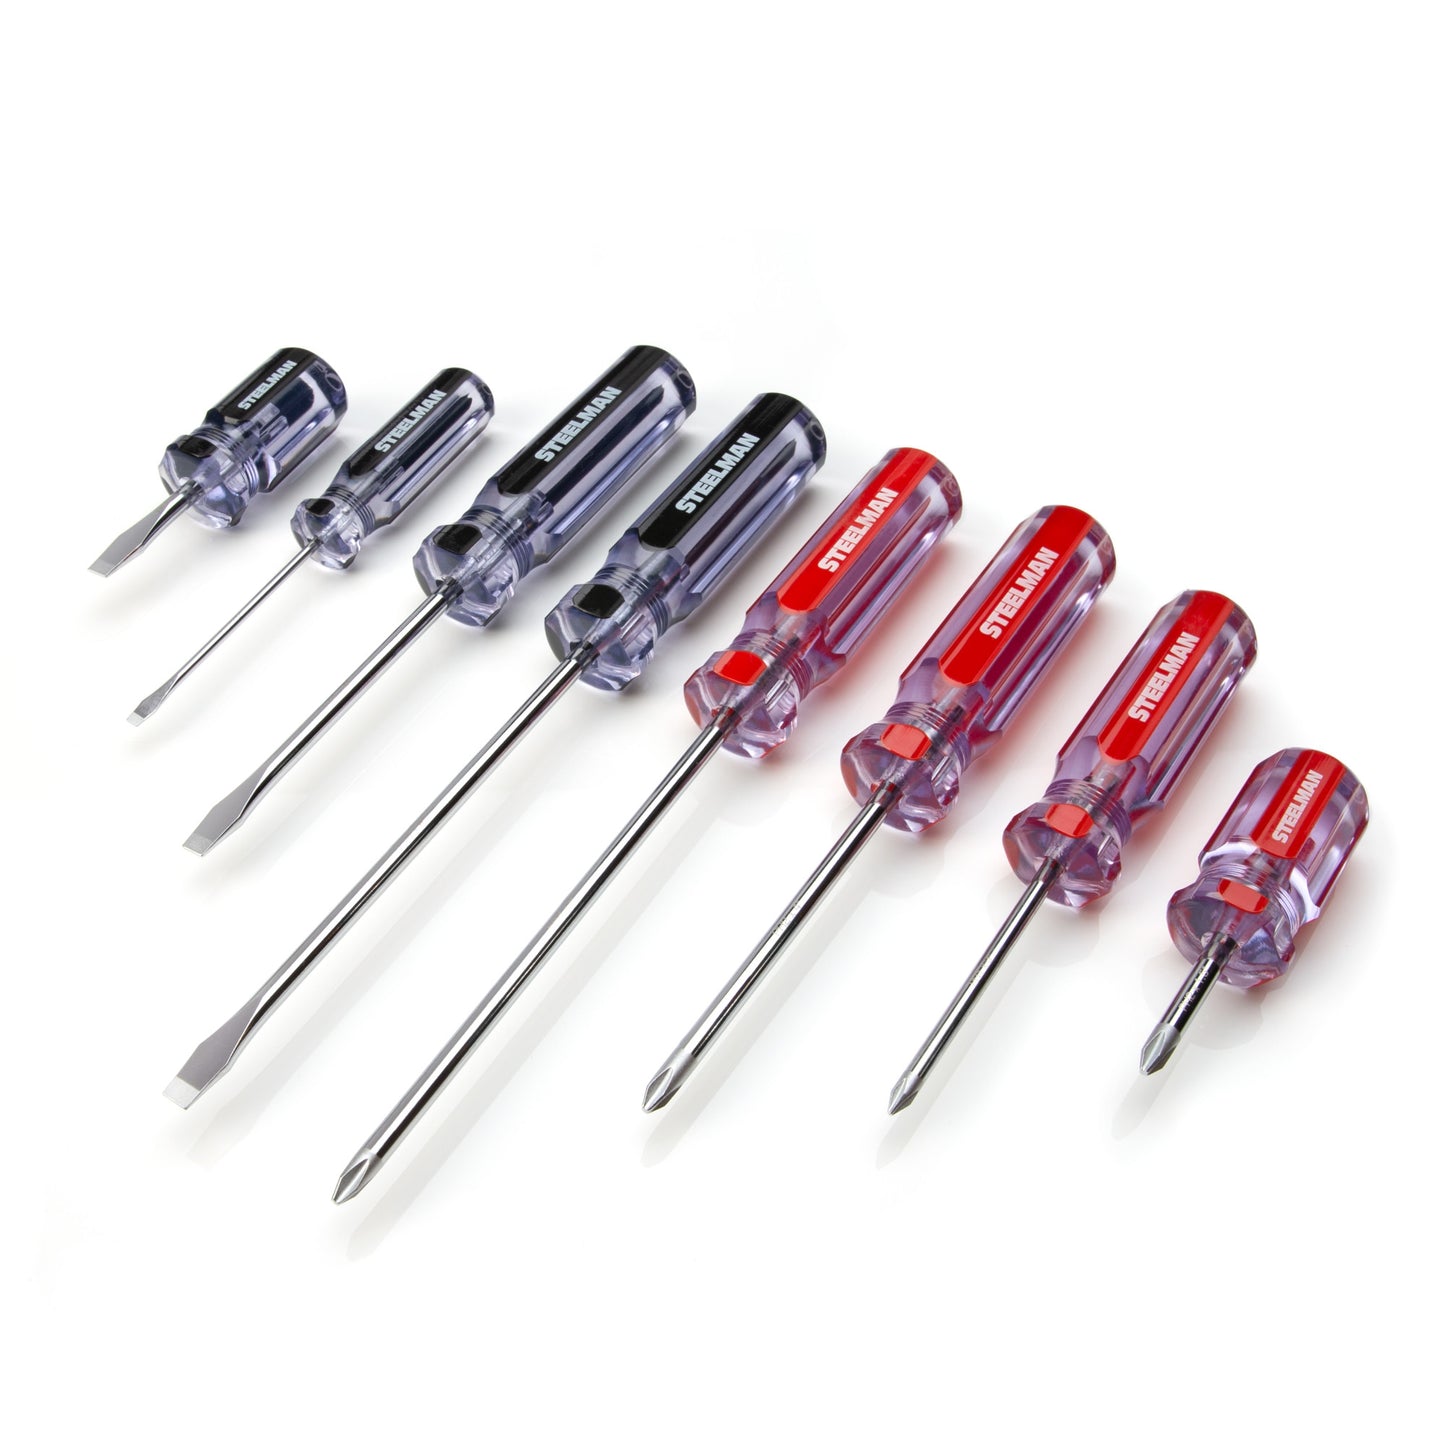 8-Piece Clear Handled Phillips and Slotted Screwdriver Set